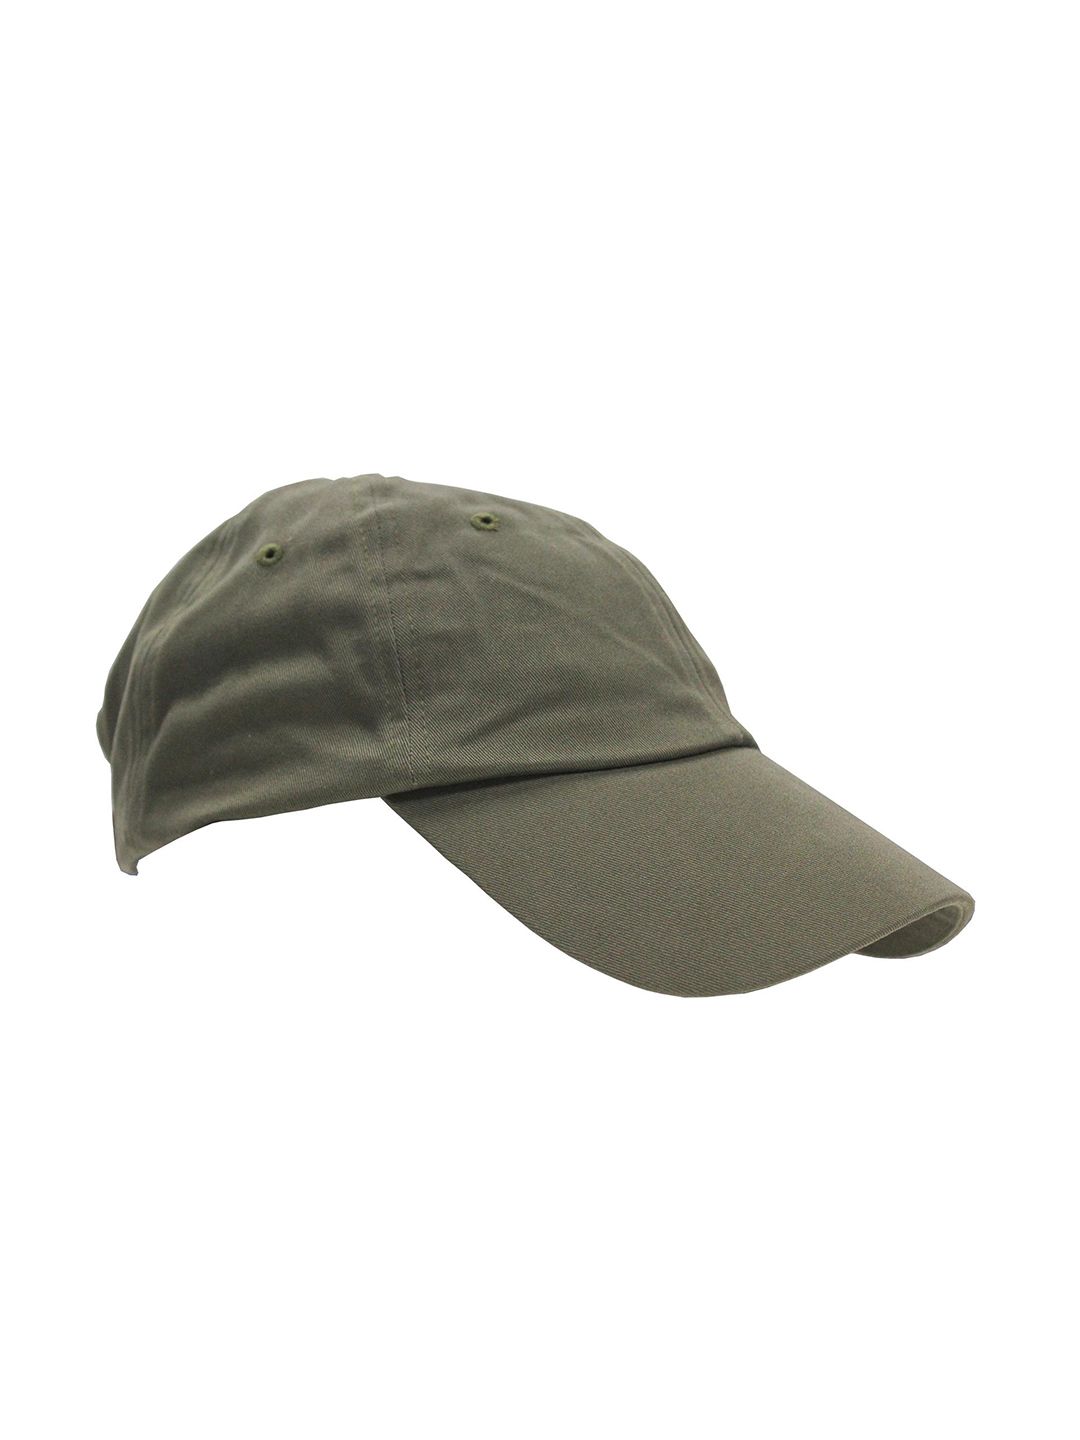 FORCLAZ By Decathlon Unisex Olive Arpenaz 20 Burnt Green Cap Price in India